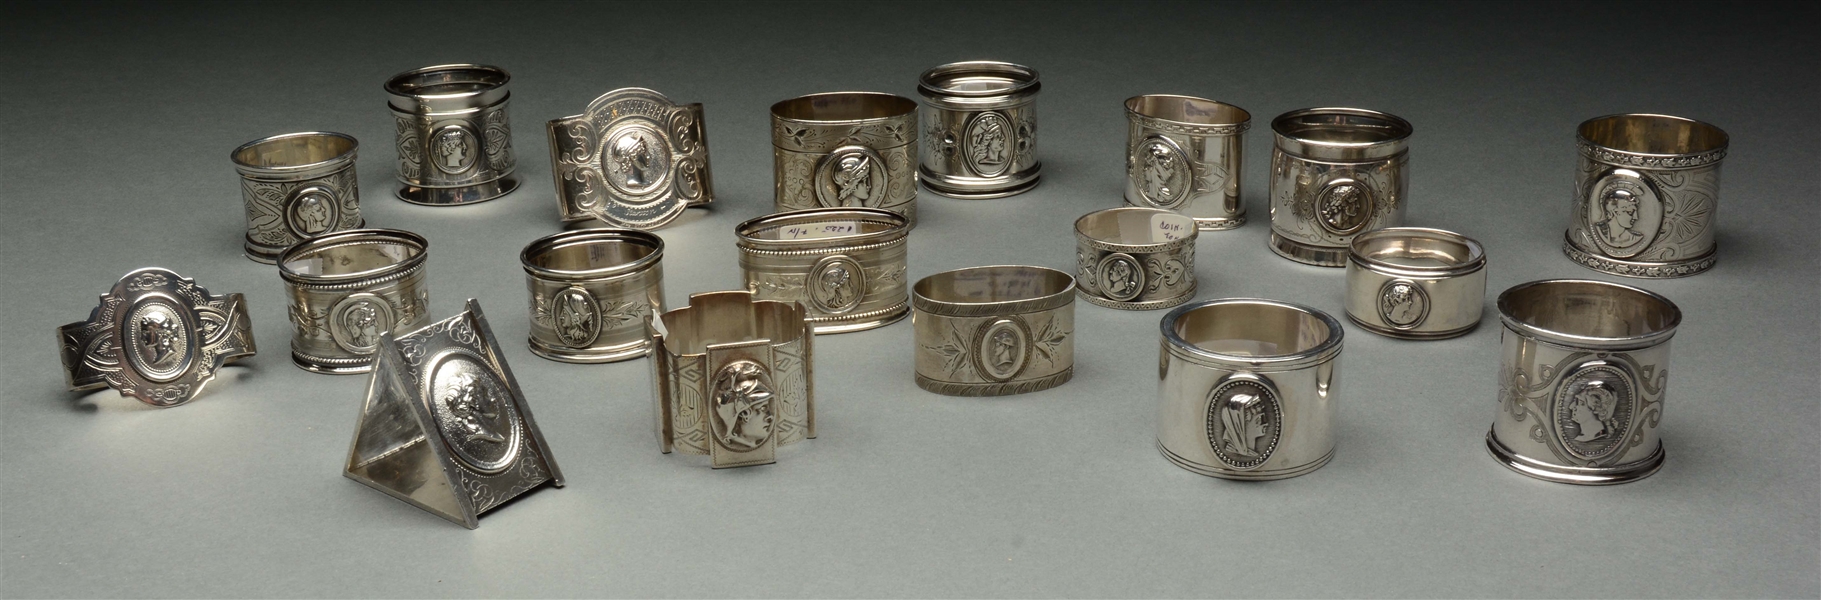 LOT OF 20: COIN MEDALLION SILVER NAPKIN RINGS. 